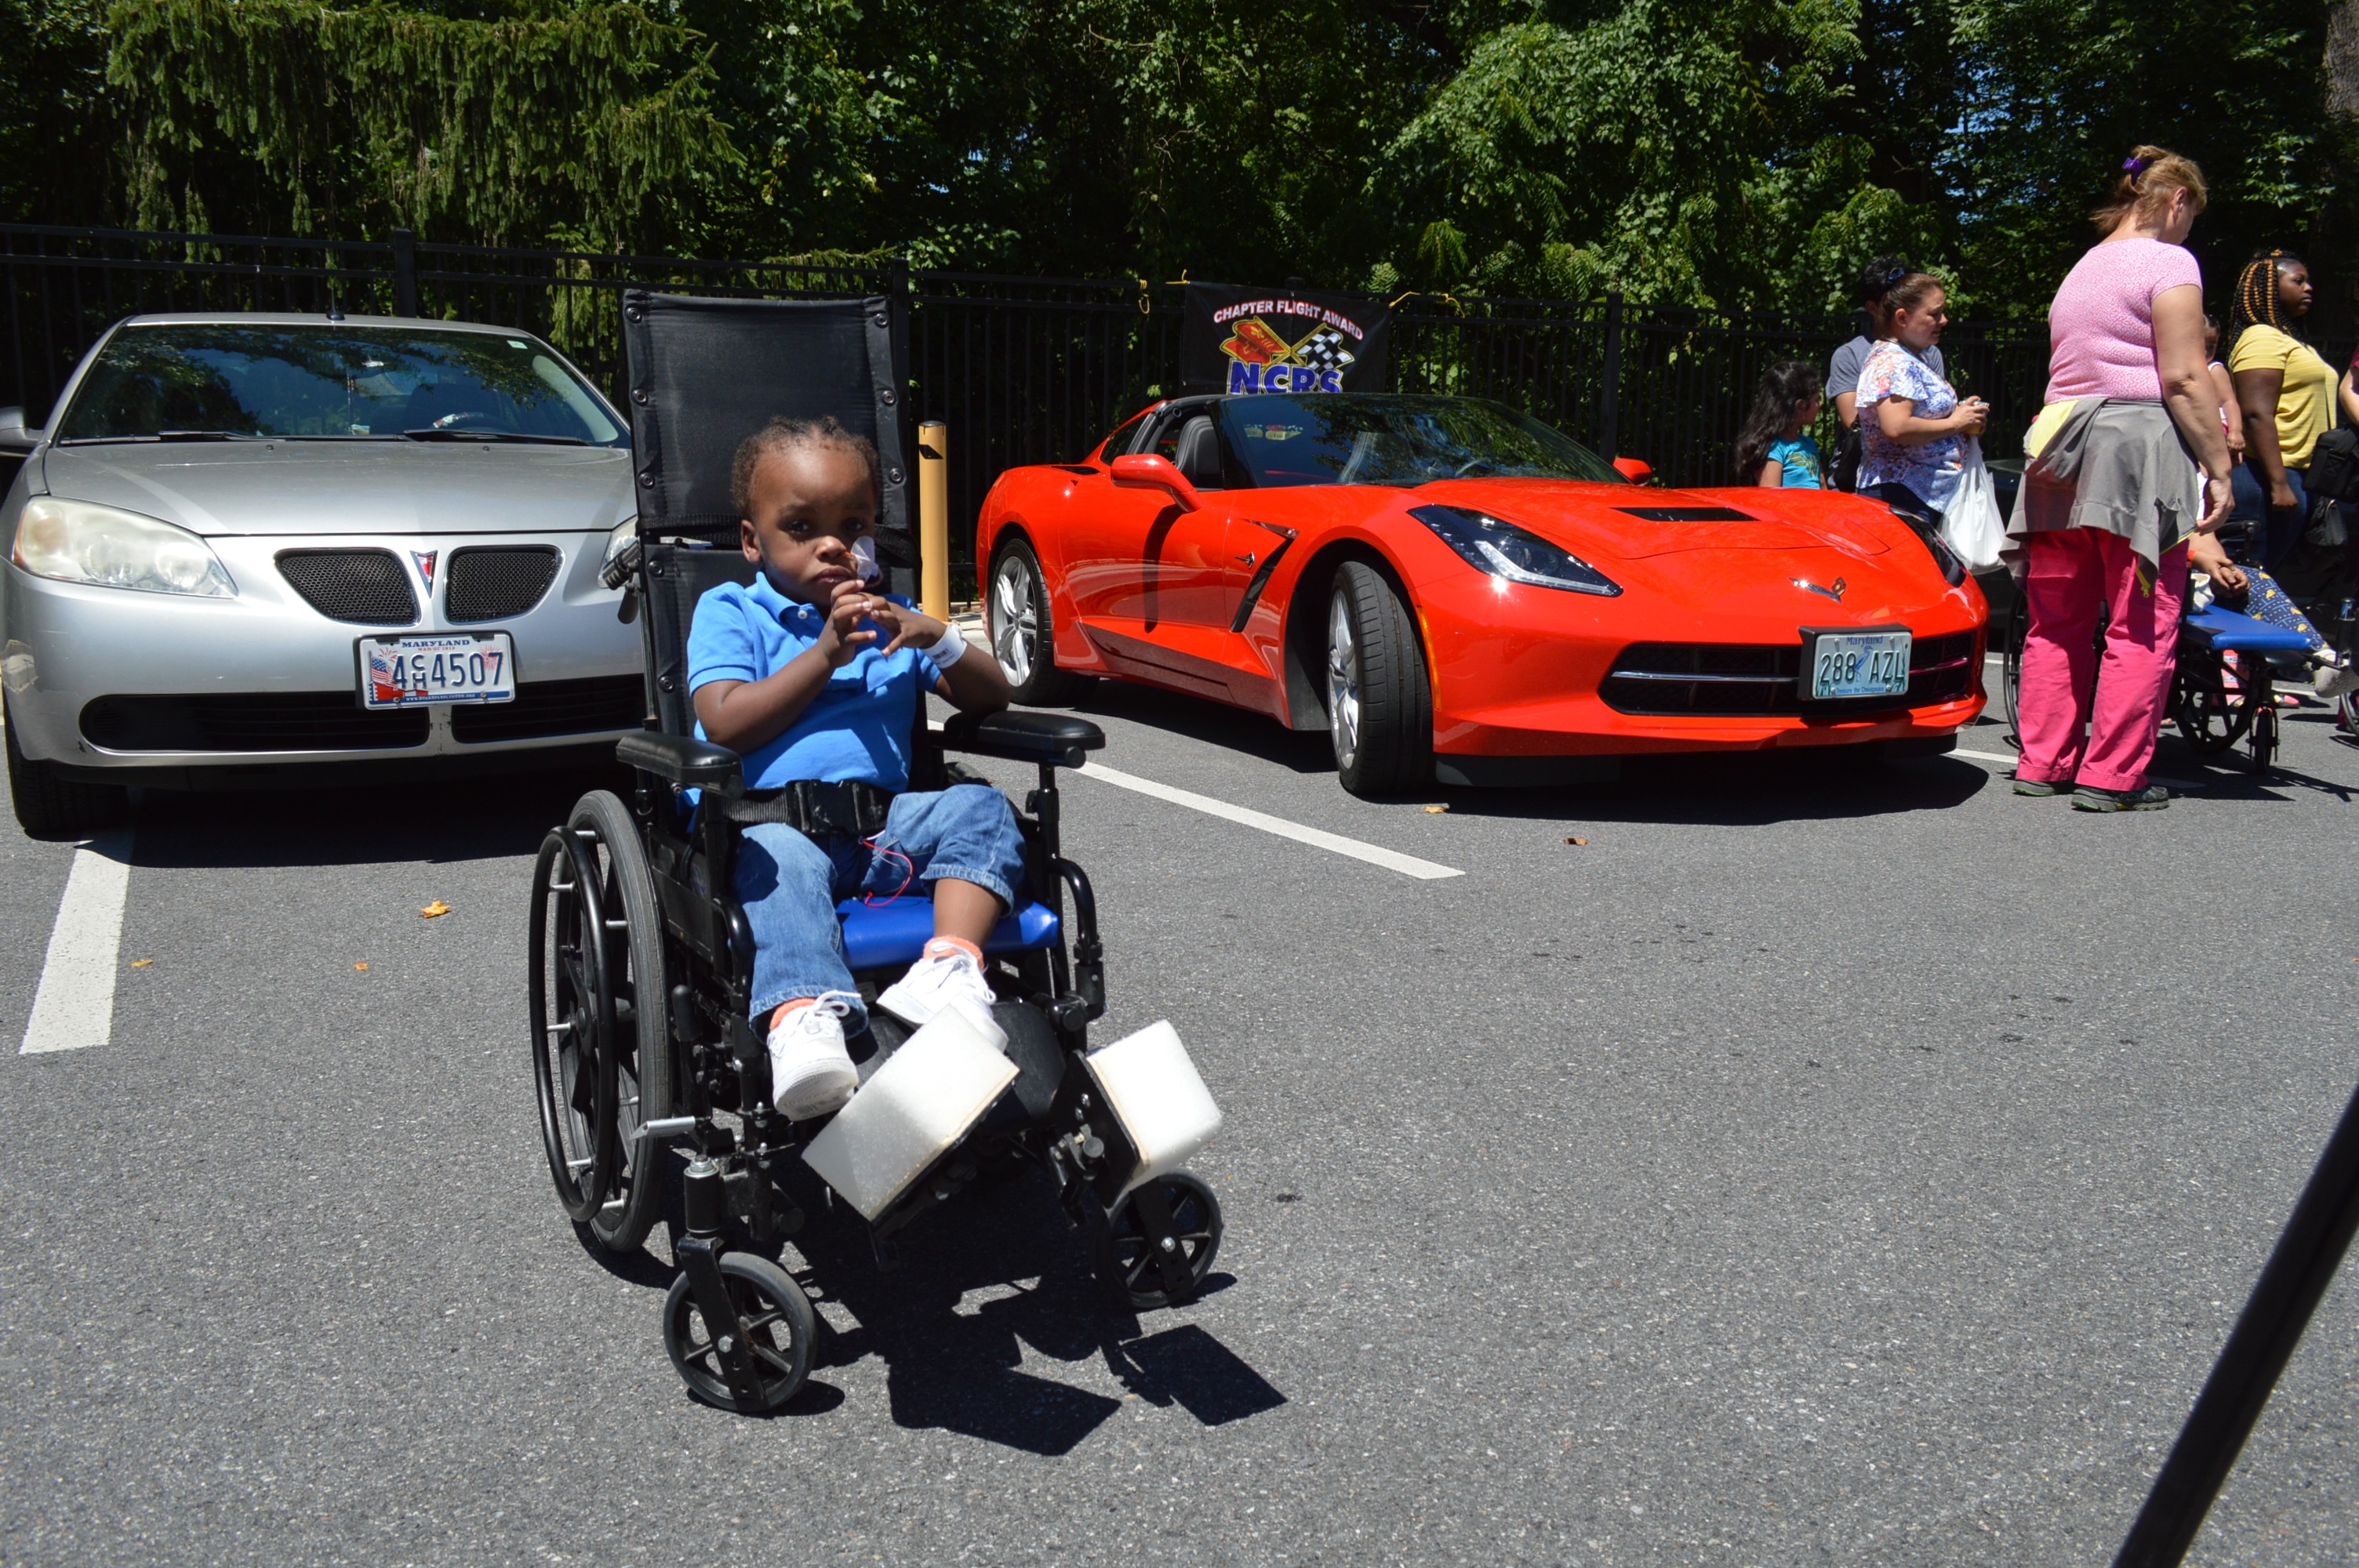 A wheelchair-bound child awaits his turn to sit in a Chevrolet Corvette. On Saturday, July 7, 2018, the Mason-Dixon Chapter of the National Corvette Restorers Society (NCRS) paid its annual visit to the Mt. Washington Pediatric Hospital in Baltimore (credit Anthony C. Hayes).